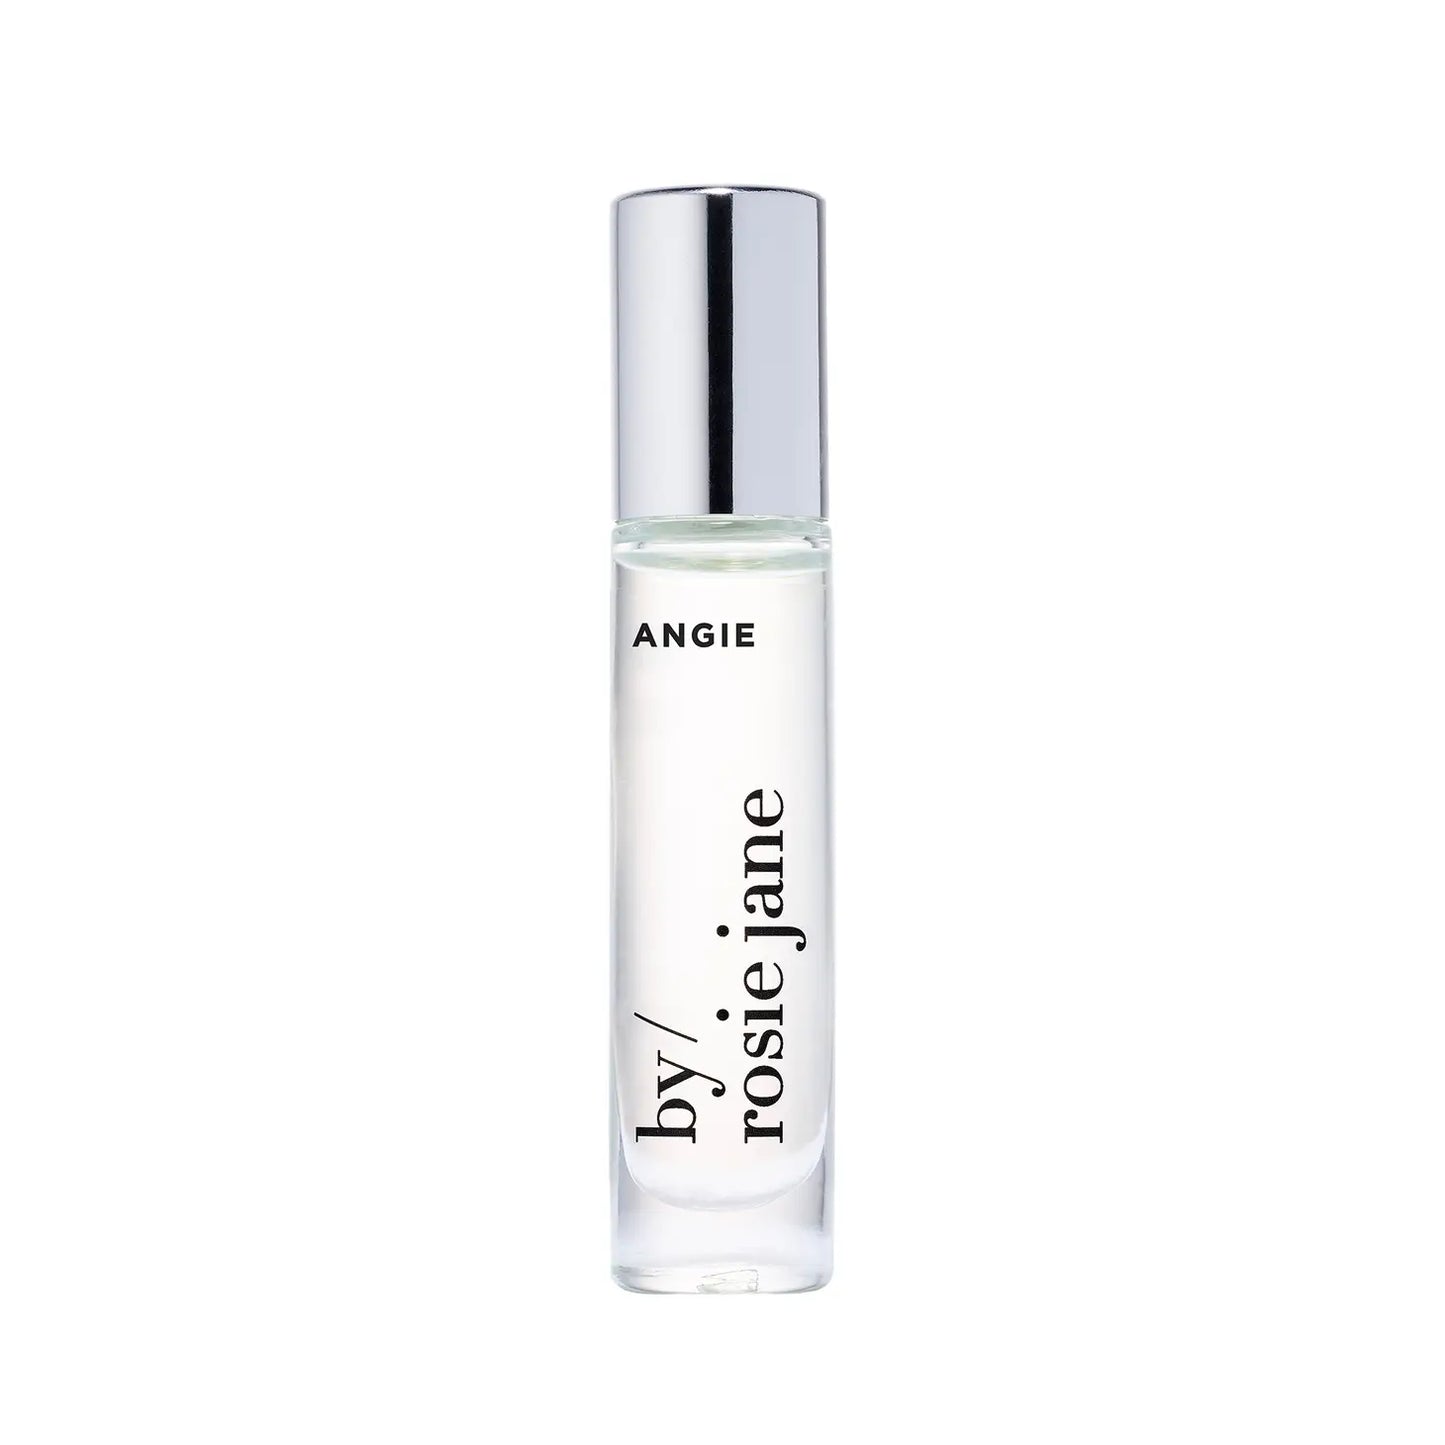 ANGIE by Rosie Jane Perfume Oil Roller